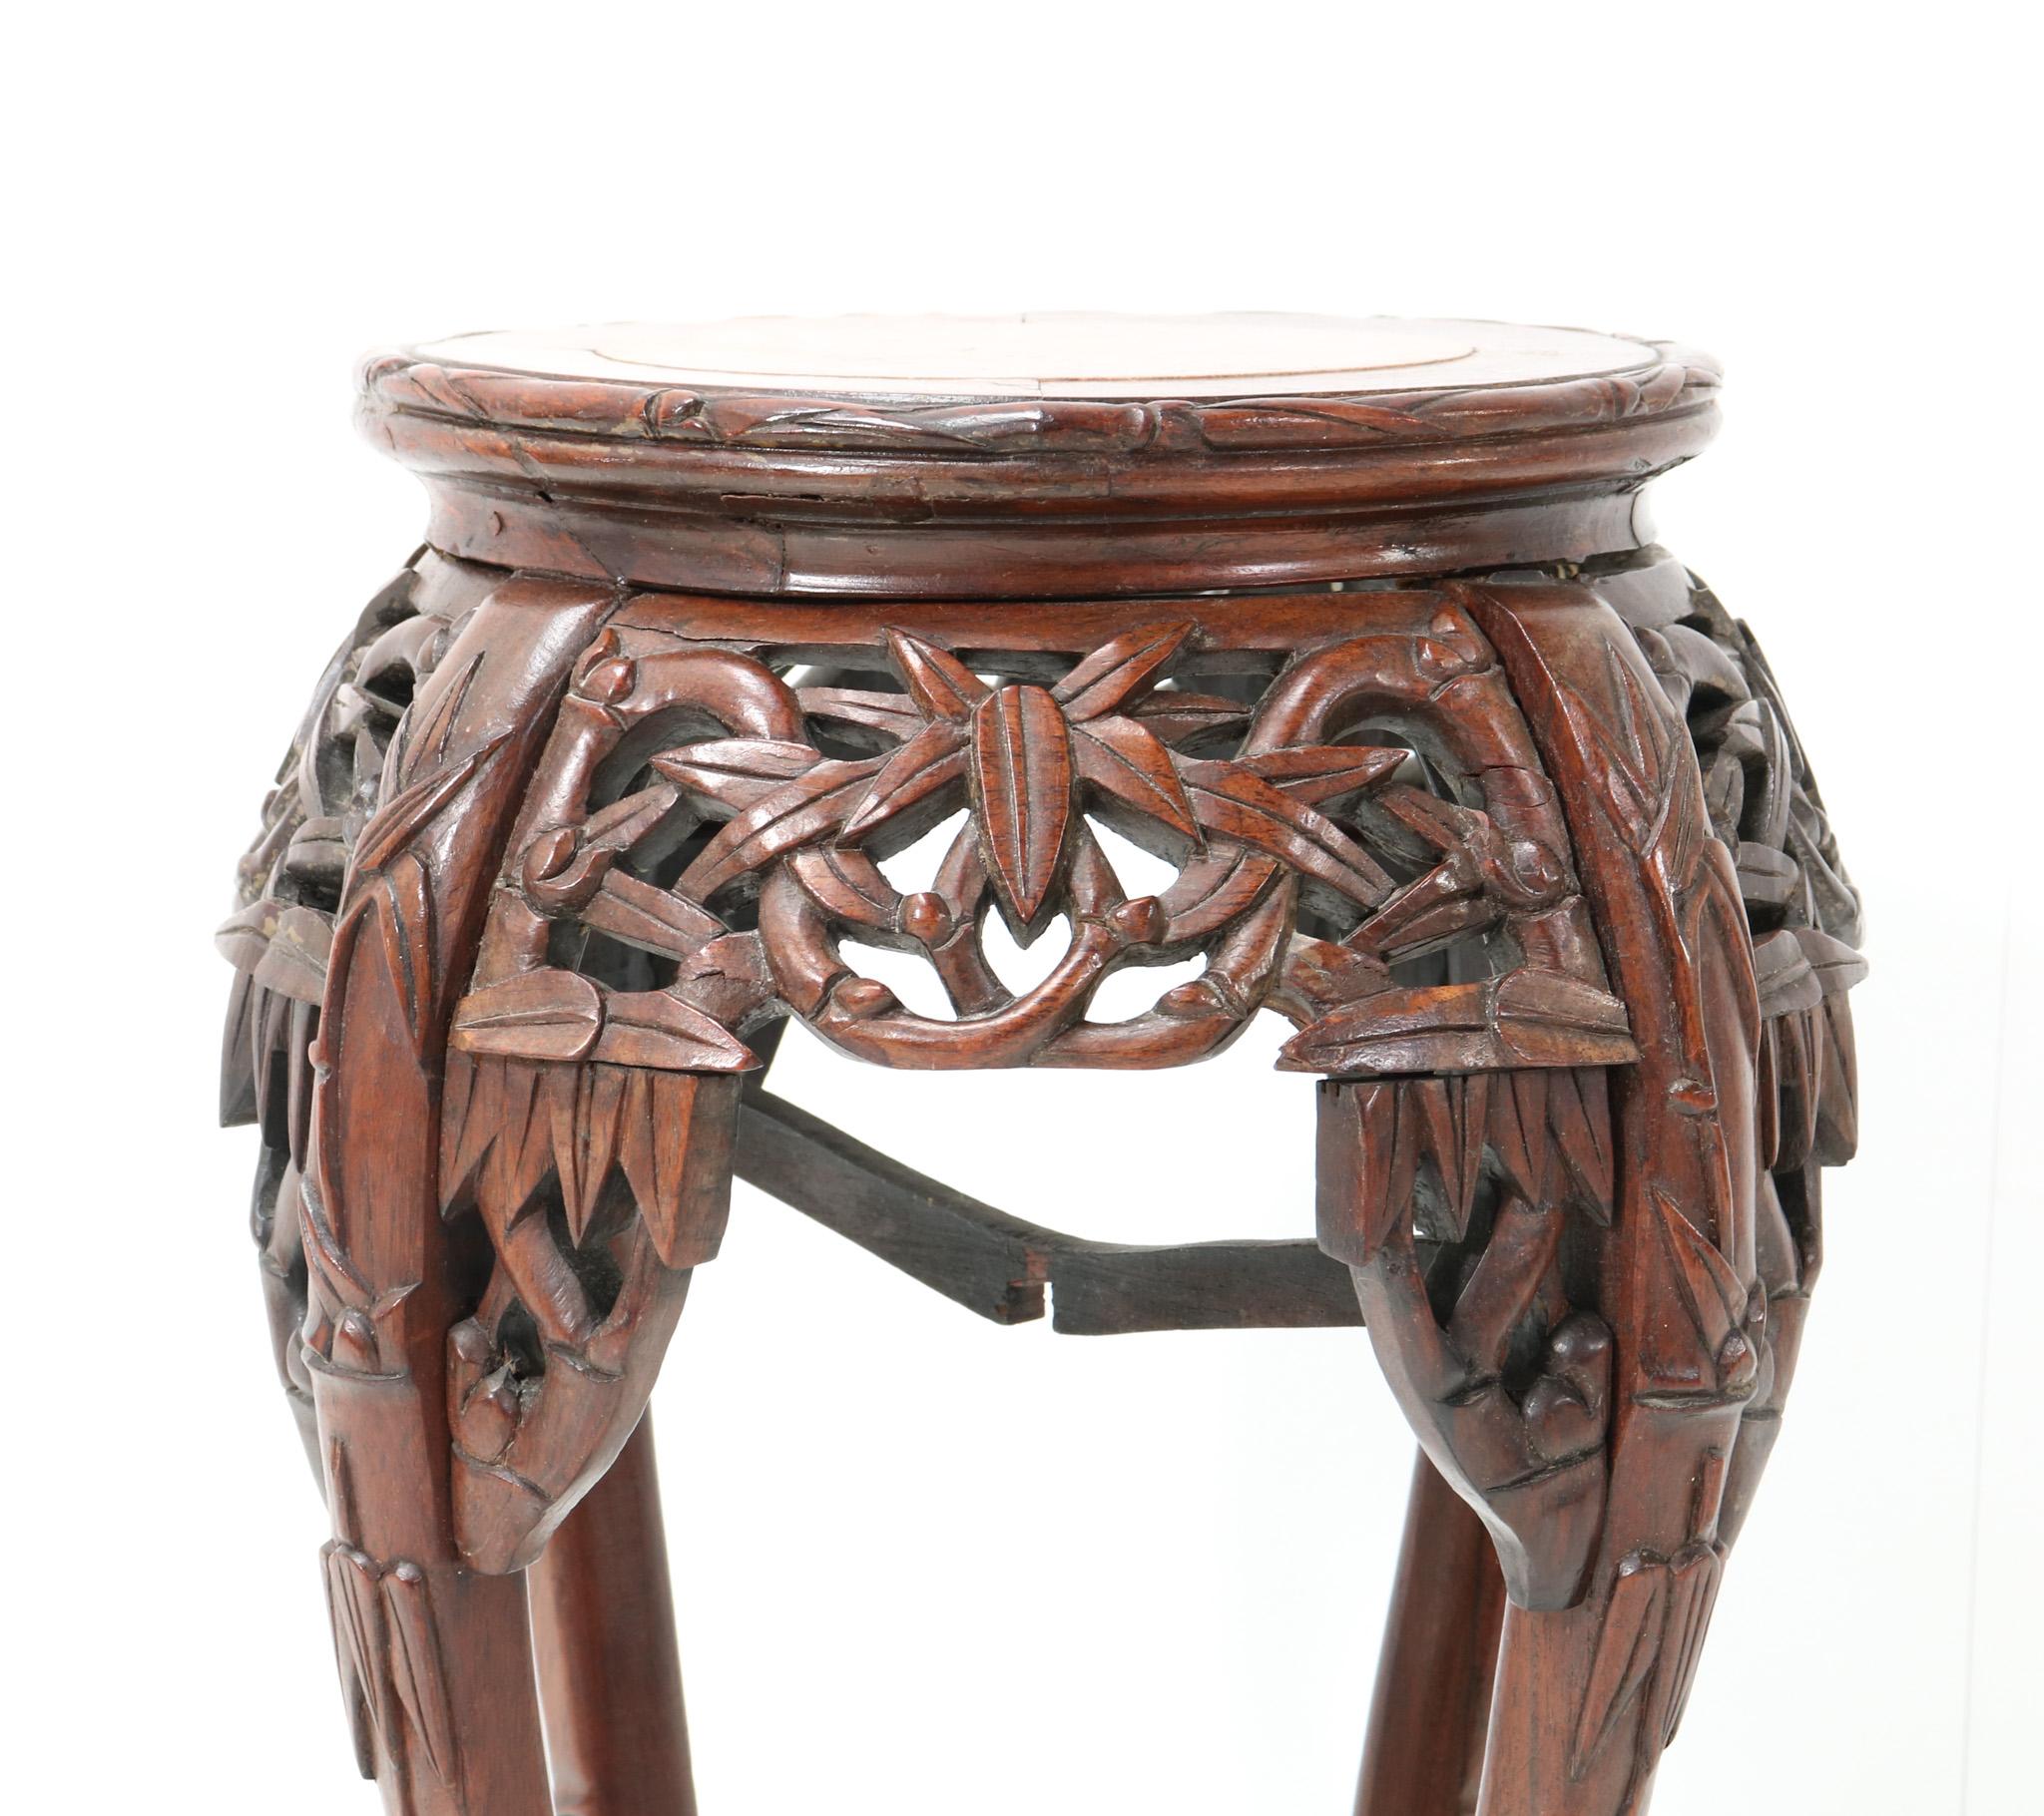 Chinese Hardwood Carved Pedestal Table with Marble Inlaid Top, 1920s For Sale 2